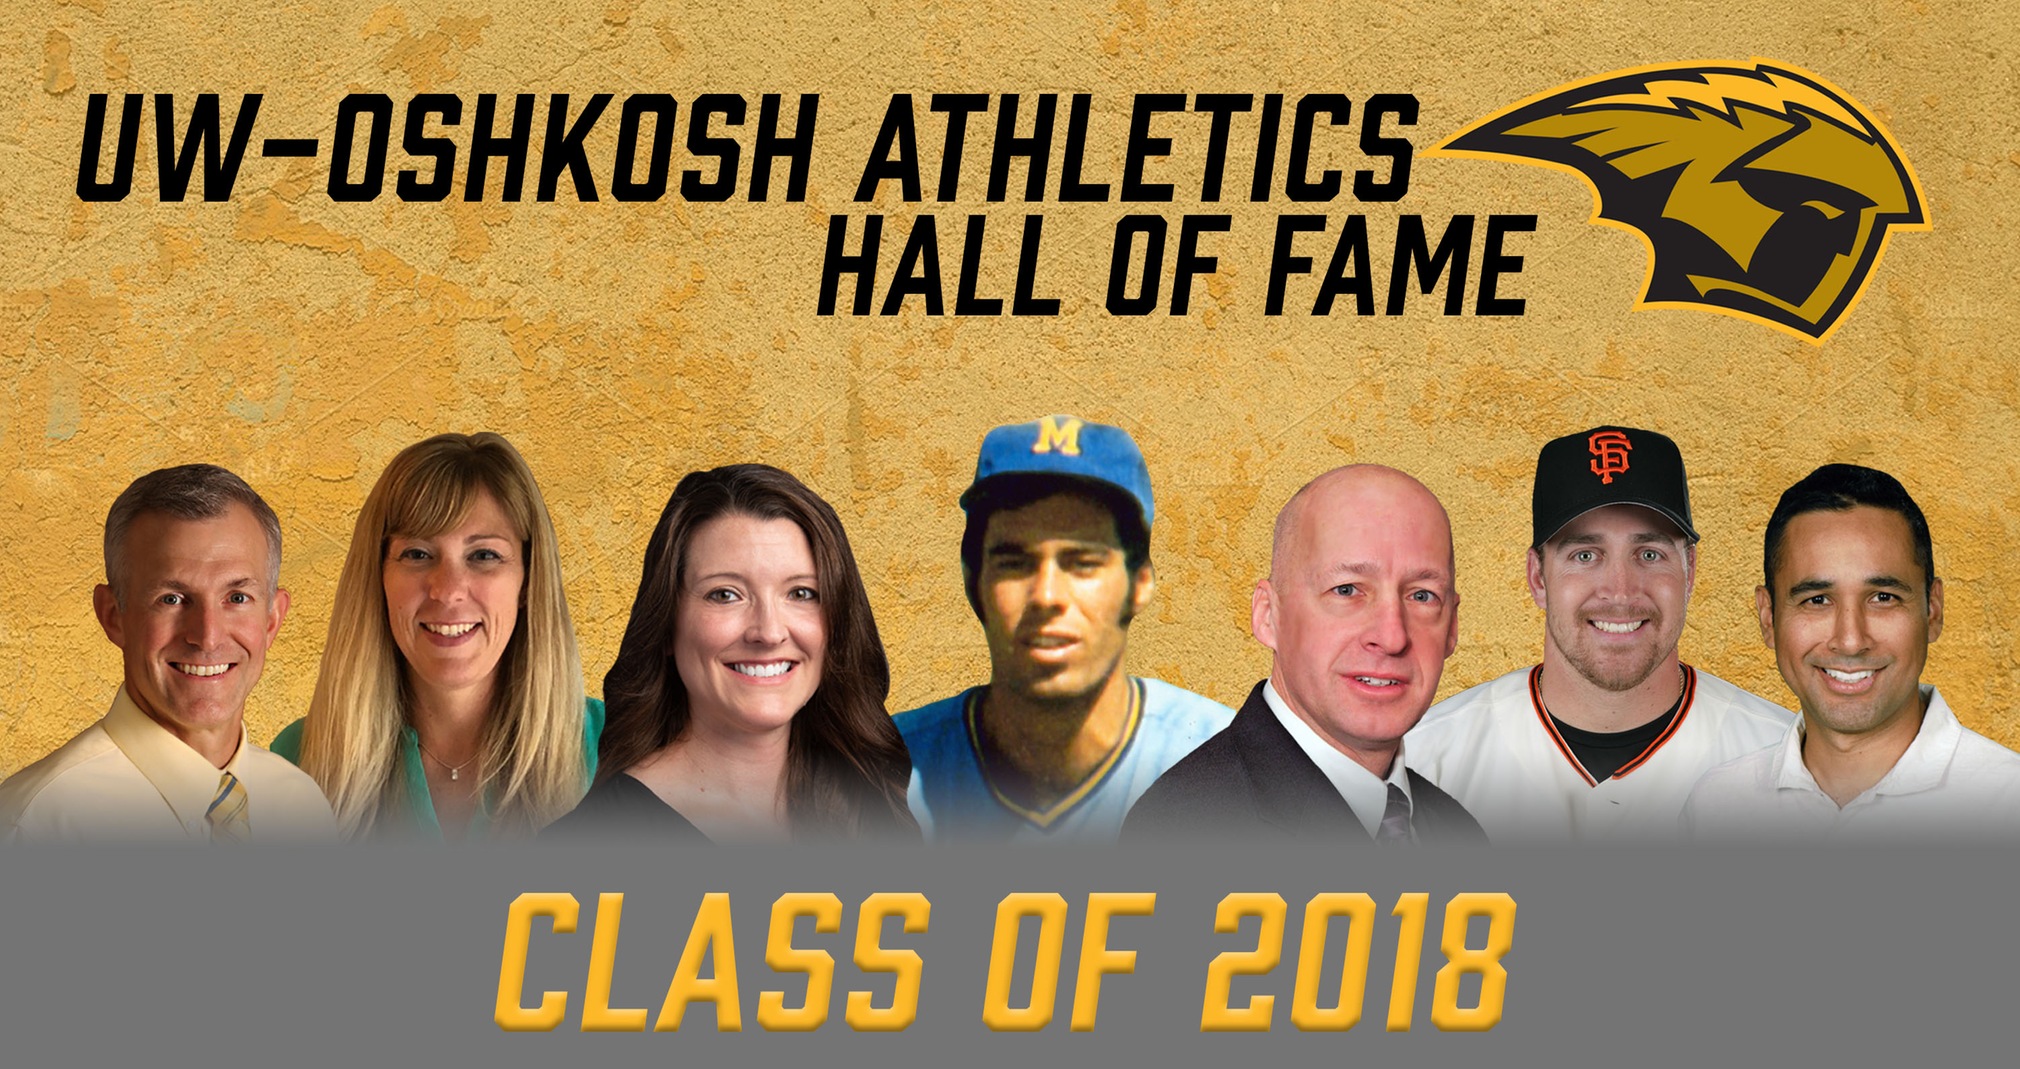 Tickets Remain Available For Hall Of Fame Induction Ceremony